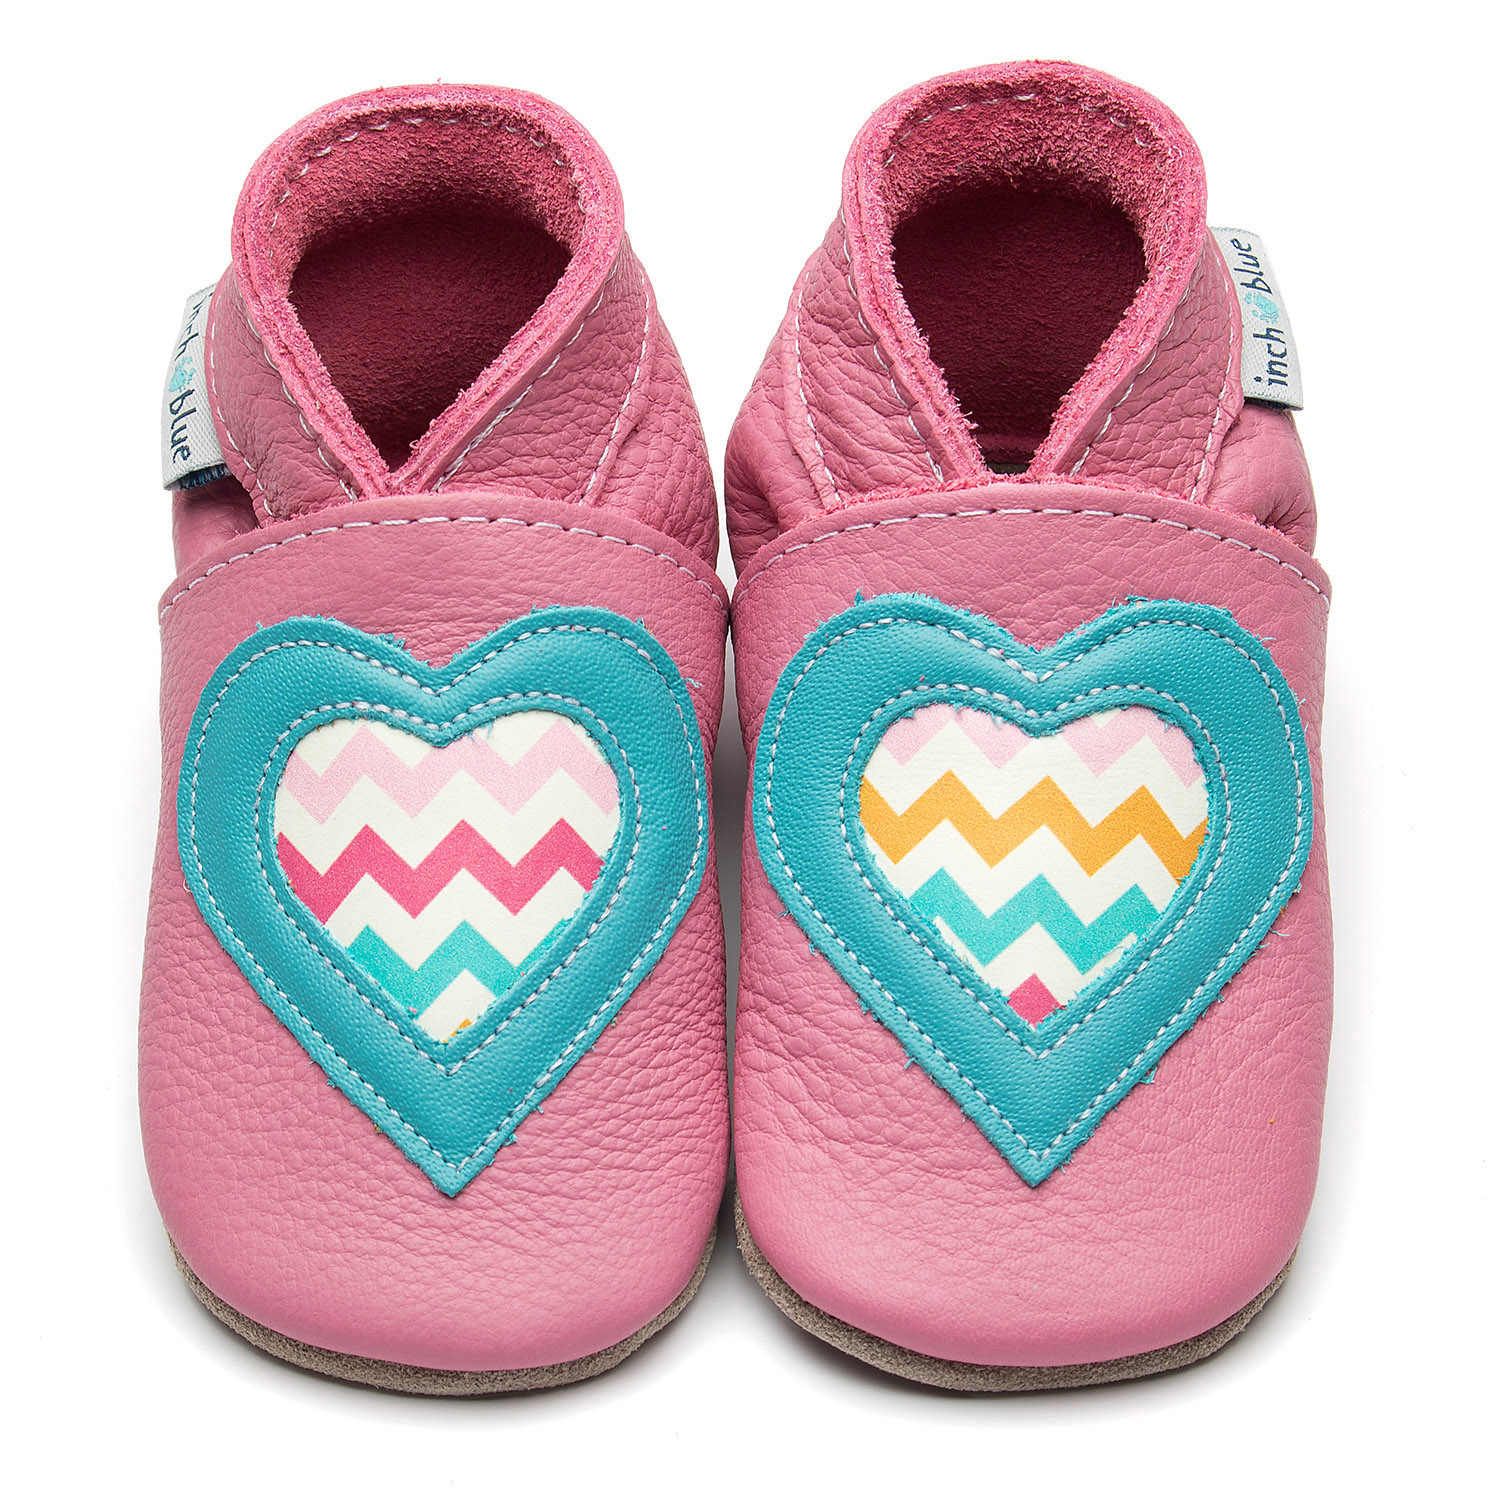 Kids' Soft Sole Shoes: Flexible, Leather, Barefoot Shoes For Kids